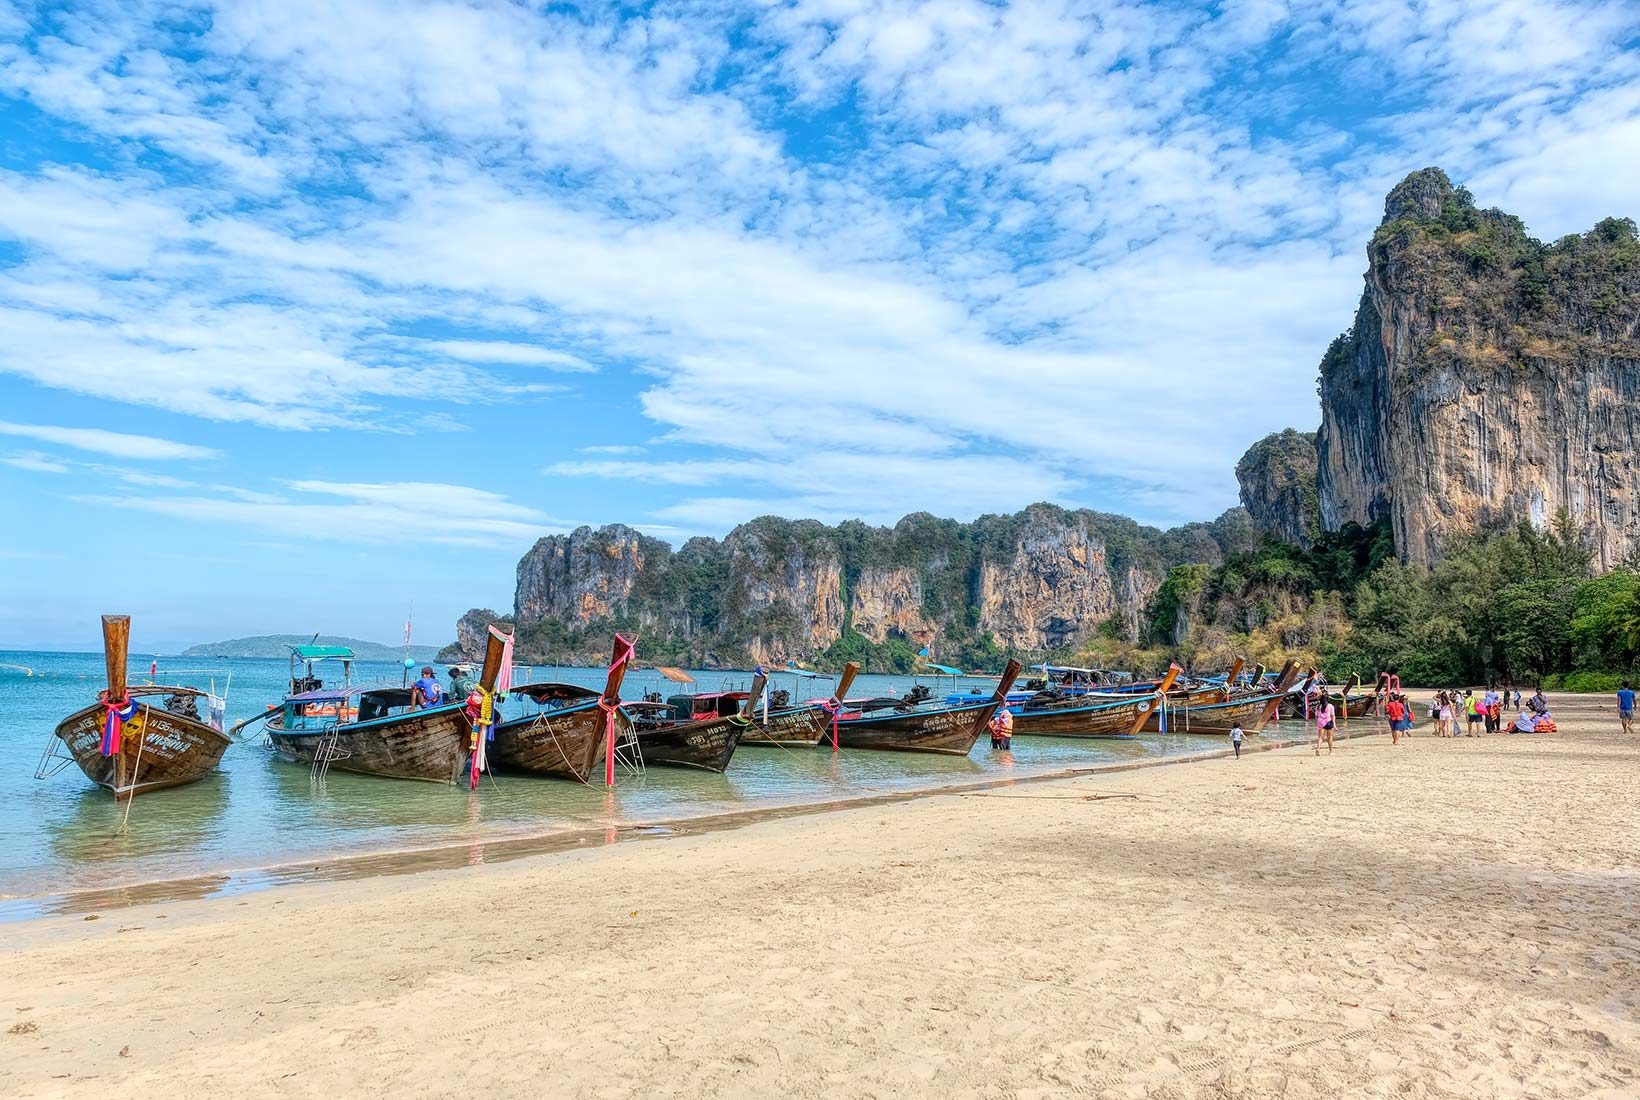 Longtail boats lined up, awaiting passengers on Railay Beach West